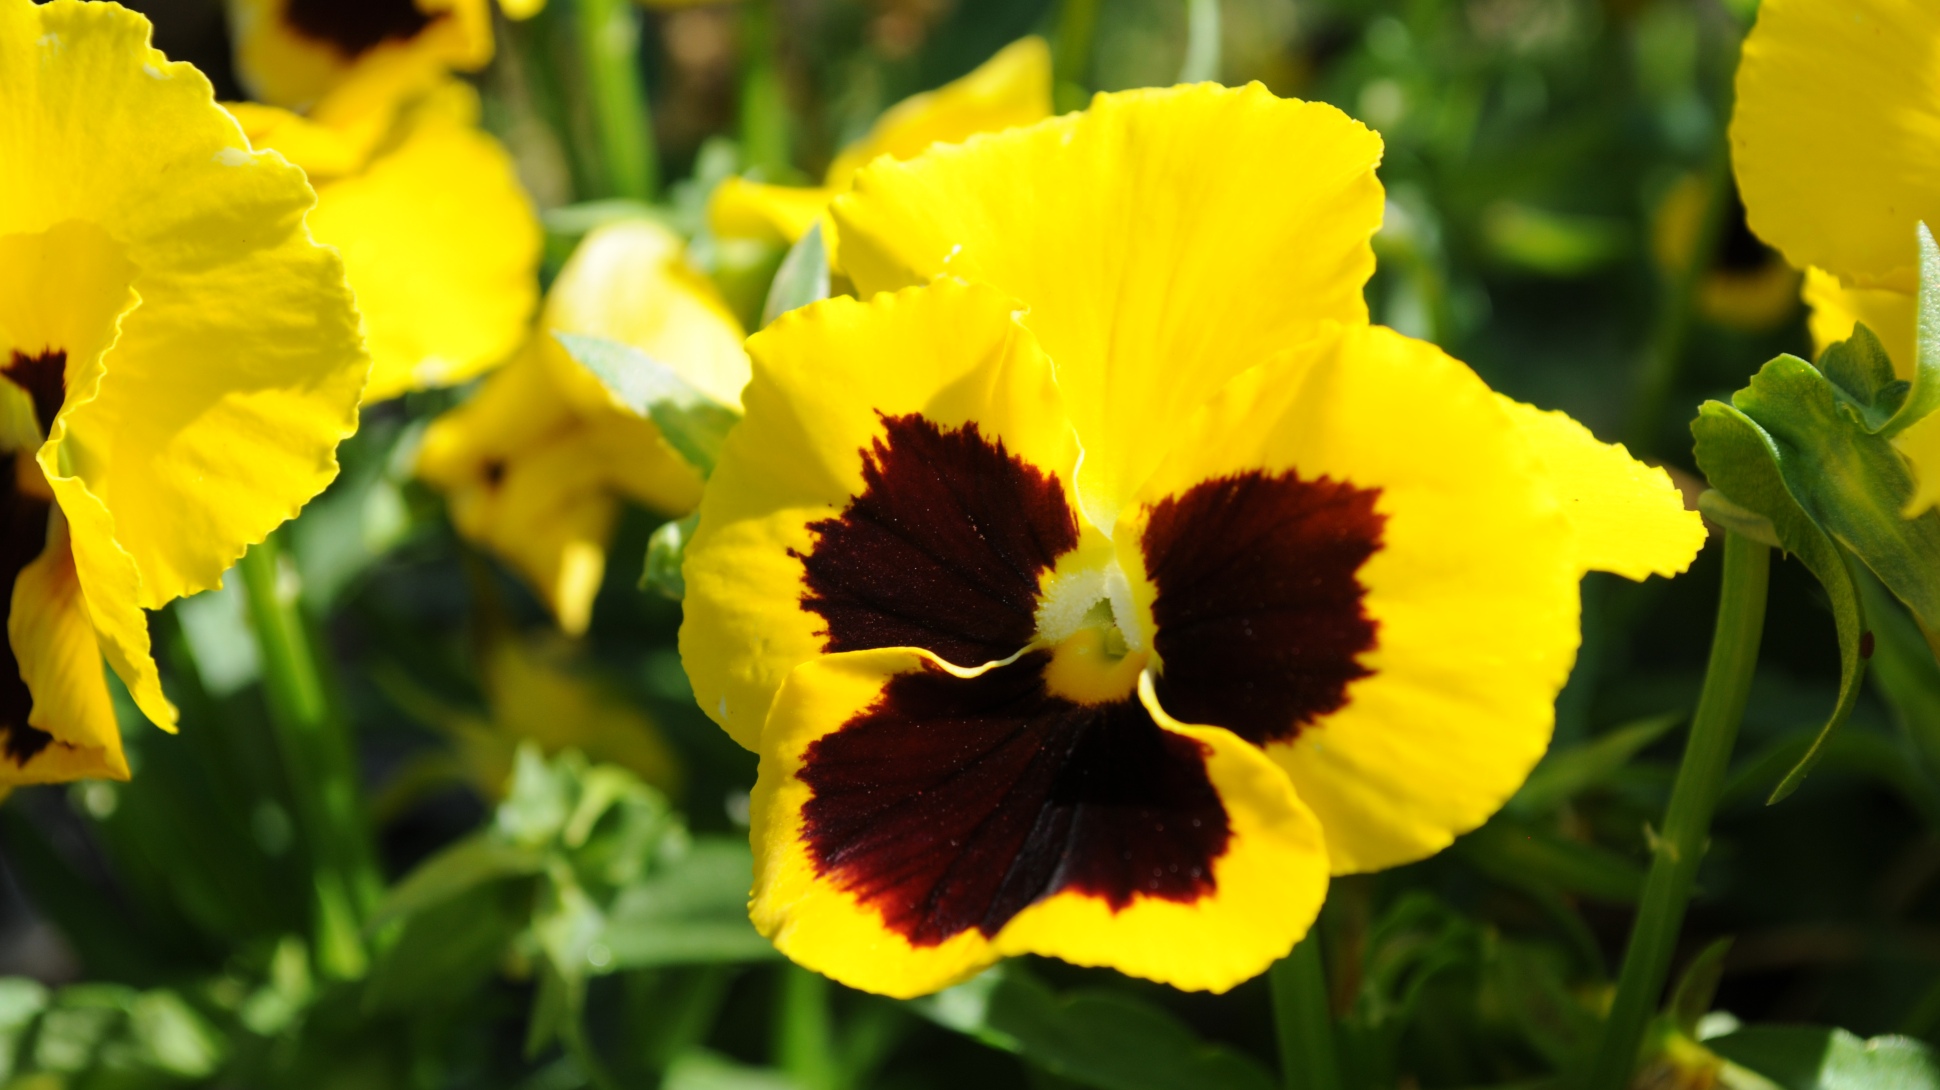 A yellow and brown garden pansy flower